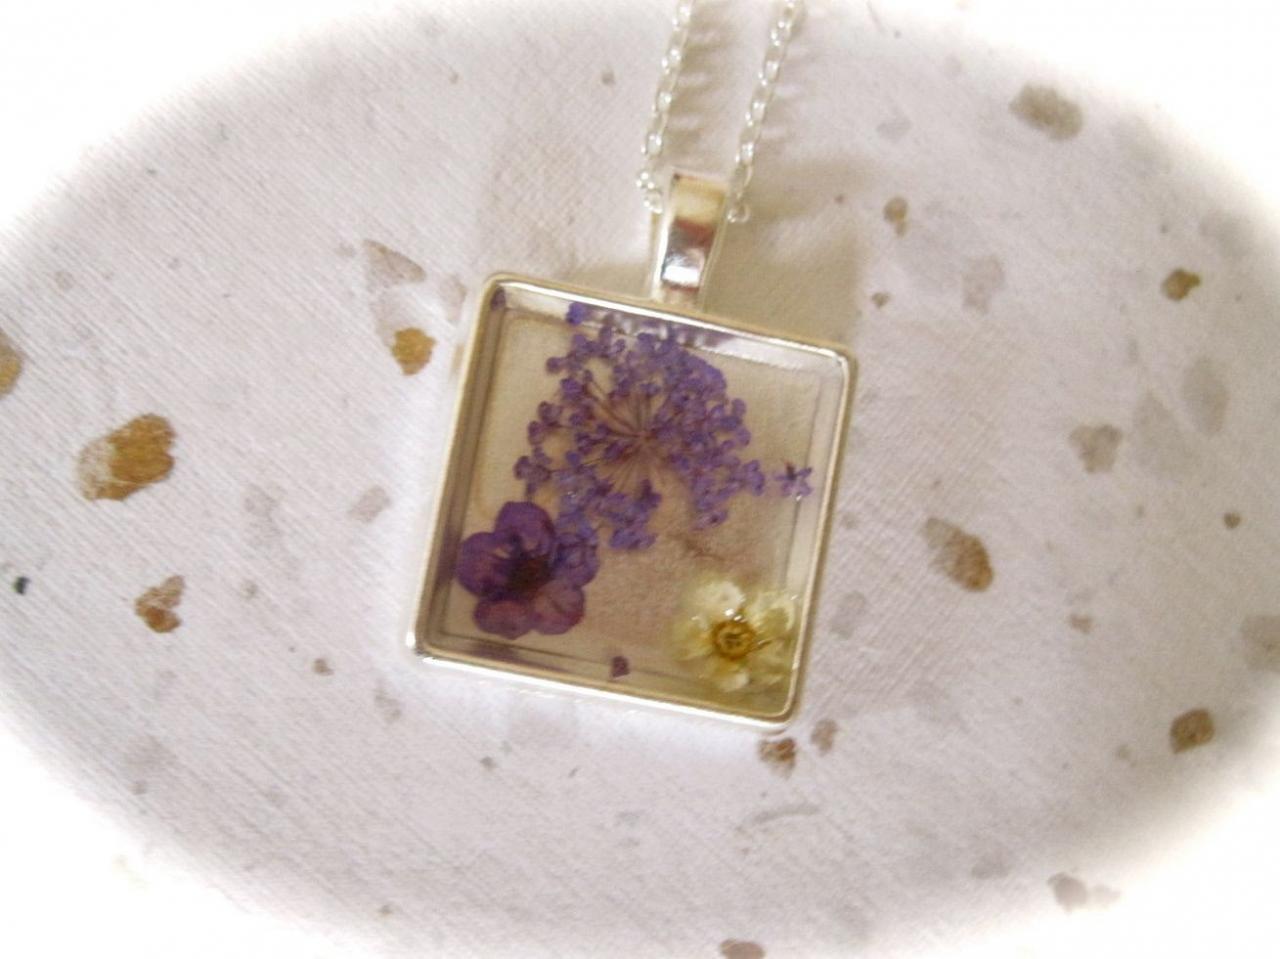 Memories Of Flowers - A Purple And White Dried Flower Memory Necklace With A Beautiful Message